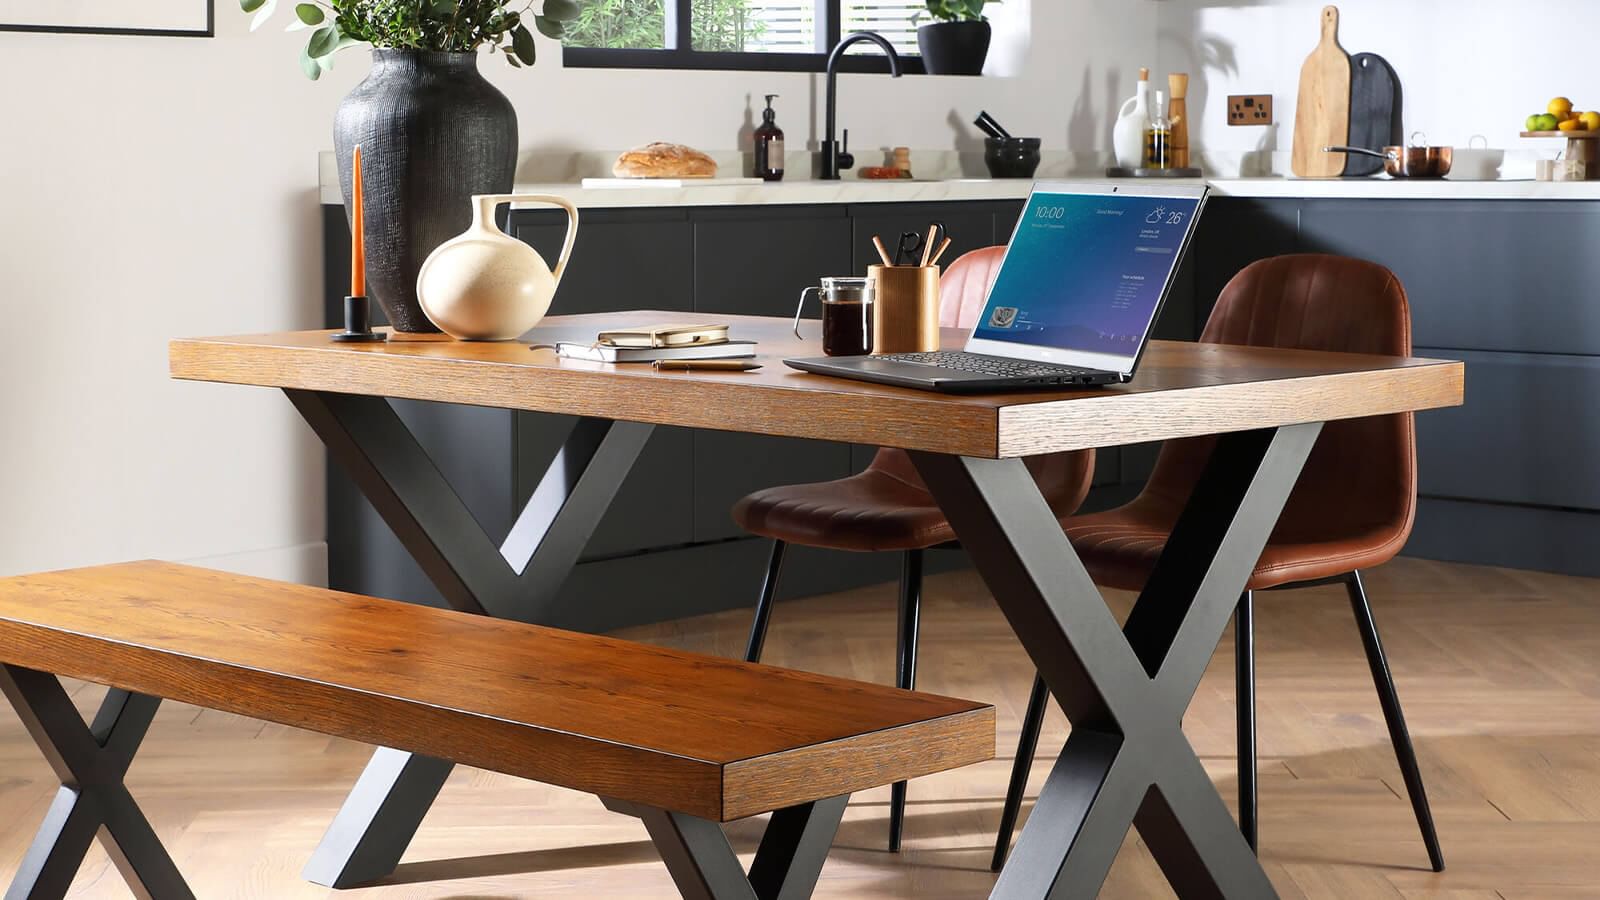 3 easy ways to style your WFH space